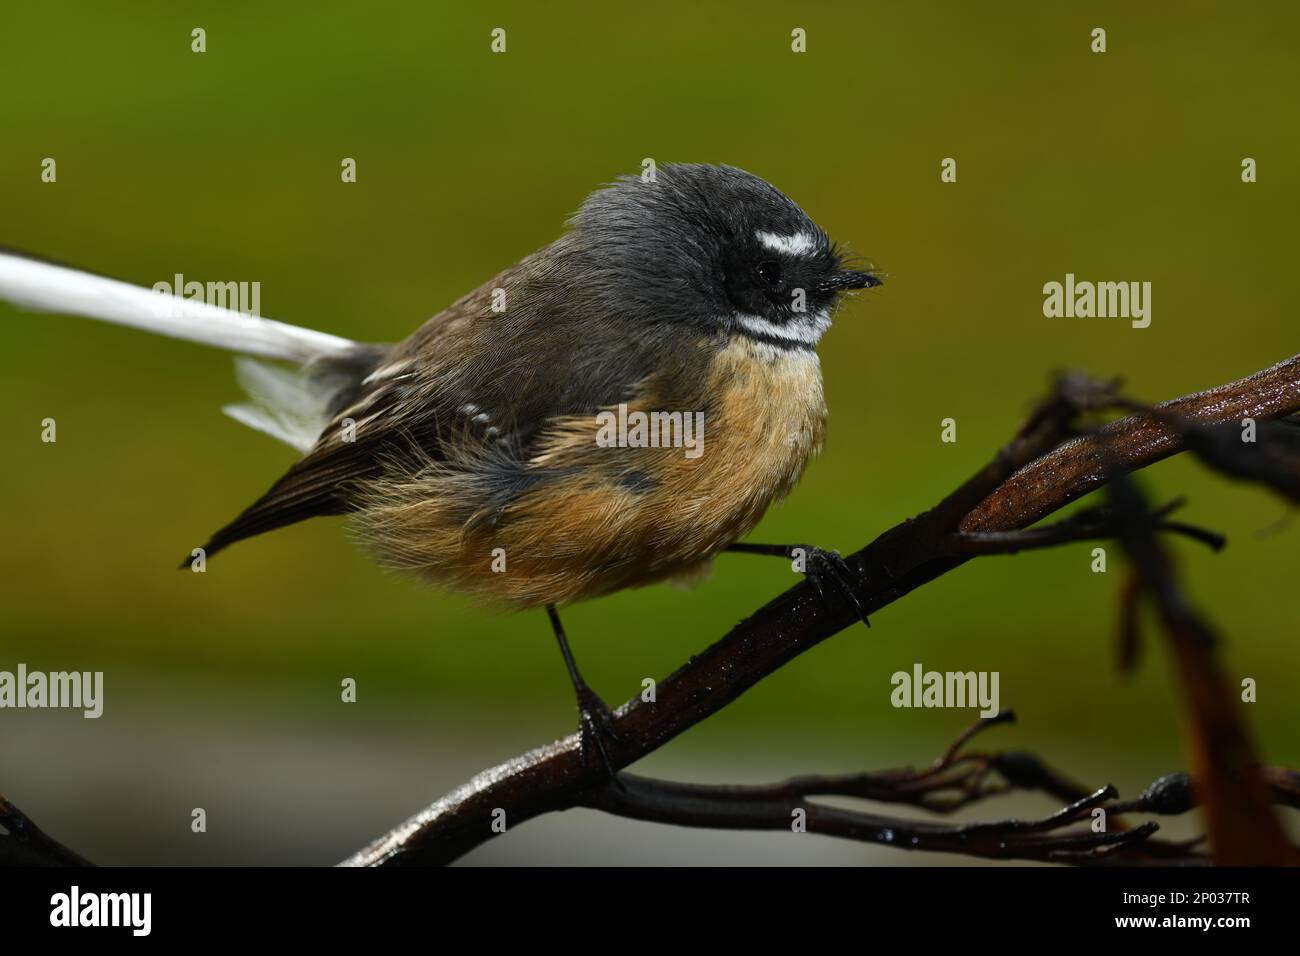 New Zealand fantail (Rhipidura fuliginosa) a small insectivorous bird, the only species of fantail in New Zealand. Stock Photo